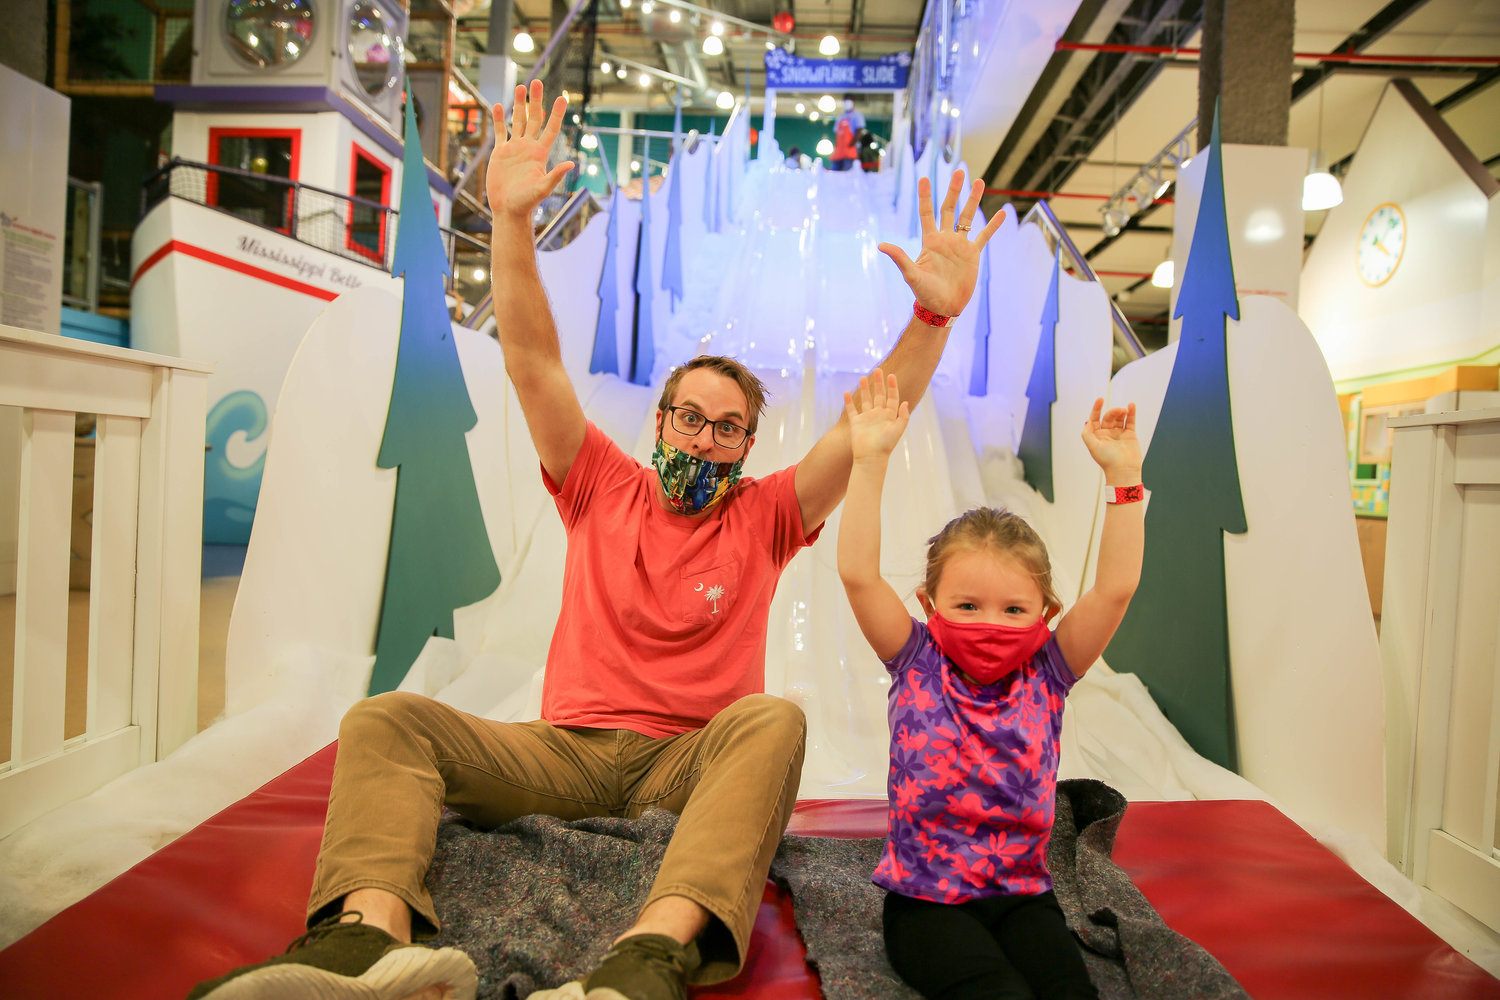 Carter Collins and Ruthie Collins finish their ride on the Snowflake Slide at the Mississippi Children’s Museum.